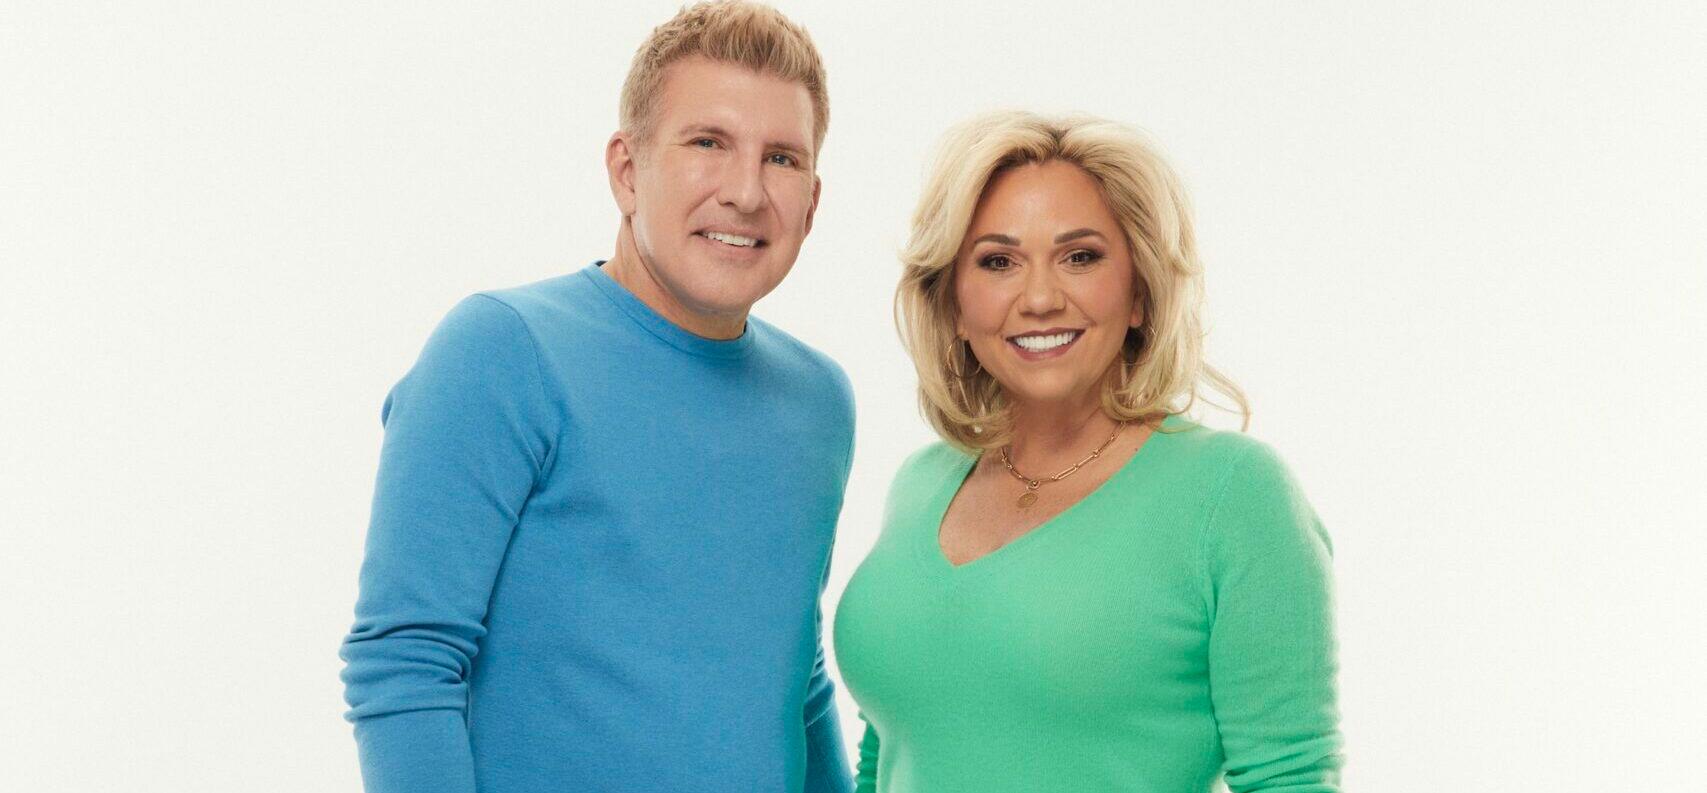 Estranged Chrisley Daughter Reveals How Her Parents Are Relishing In Freedom Before Prison